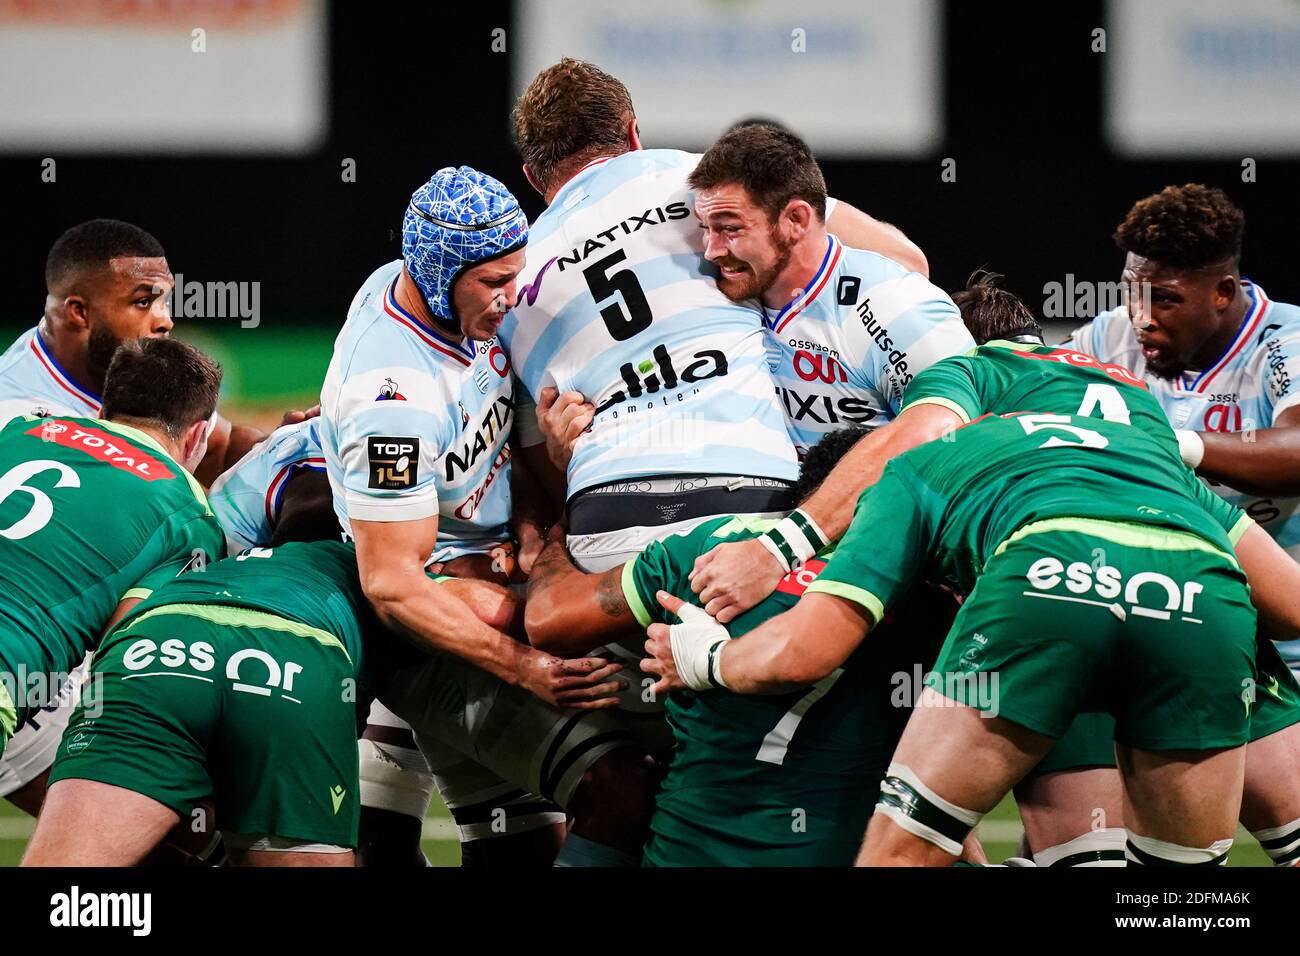 Wenceslas Lauret, Dominic Bird and Fabien Sanconnie (R92) in action during  the rugby TOP 14 match between Racing 92 (R92) and Pau (SP) at the Paris La  Defense Arena, in Nanterre, France